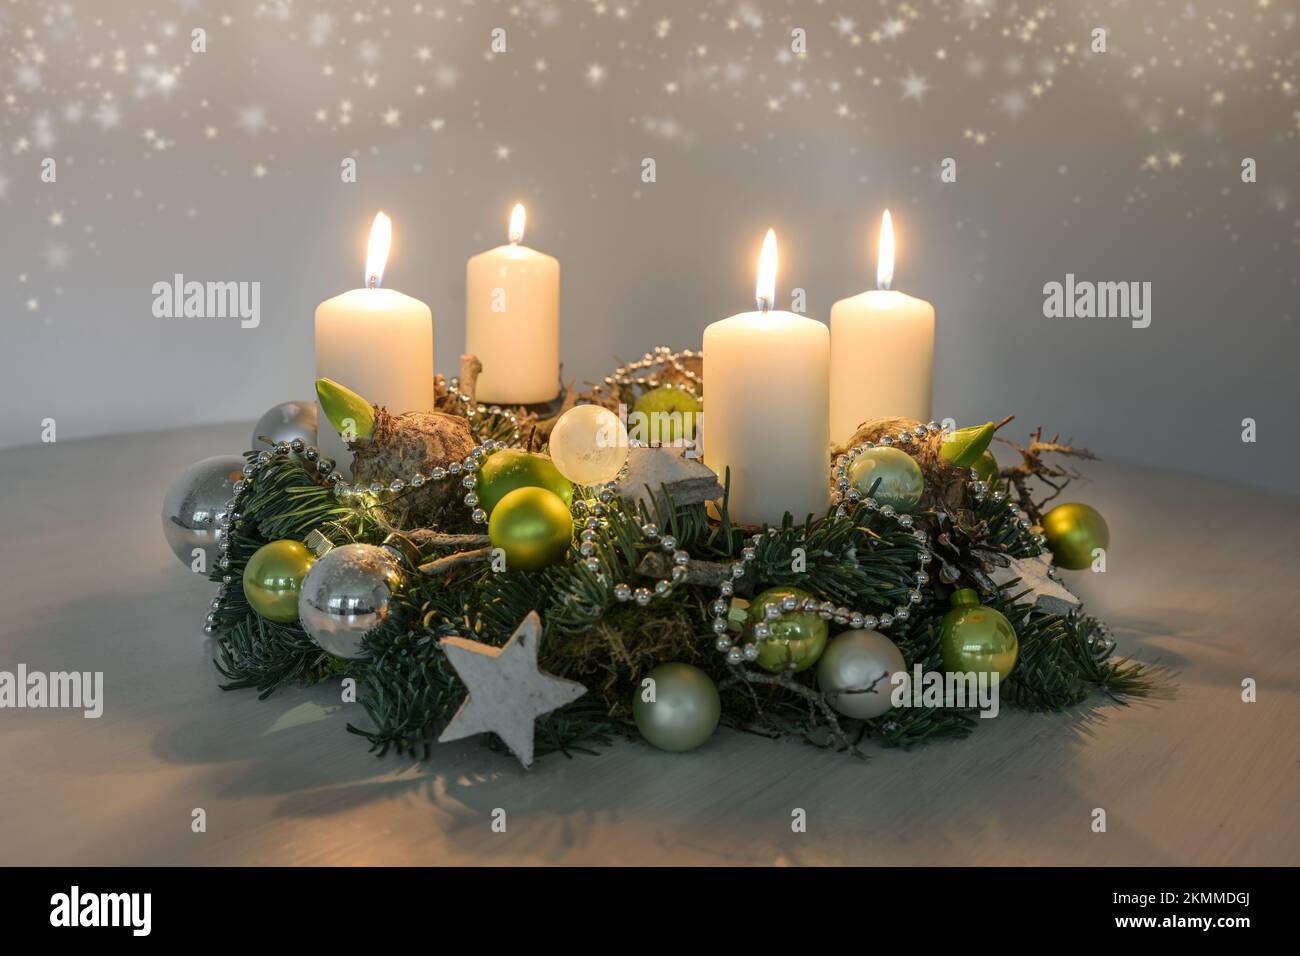 Fourth Advent, wreath with four burning white candles and green Christmas decoration on a table, home decor for the fourth Sunday, copy space, selecte Stock Photo